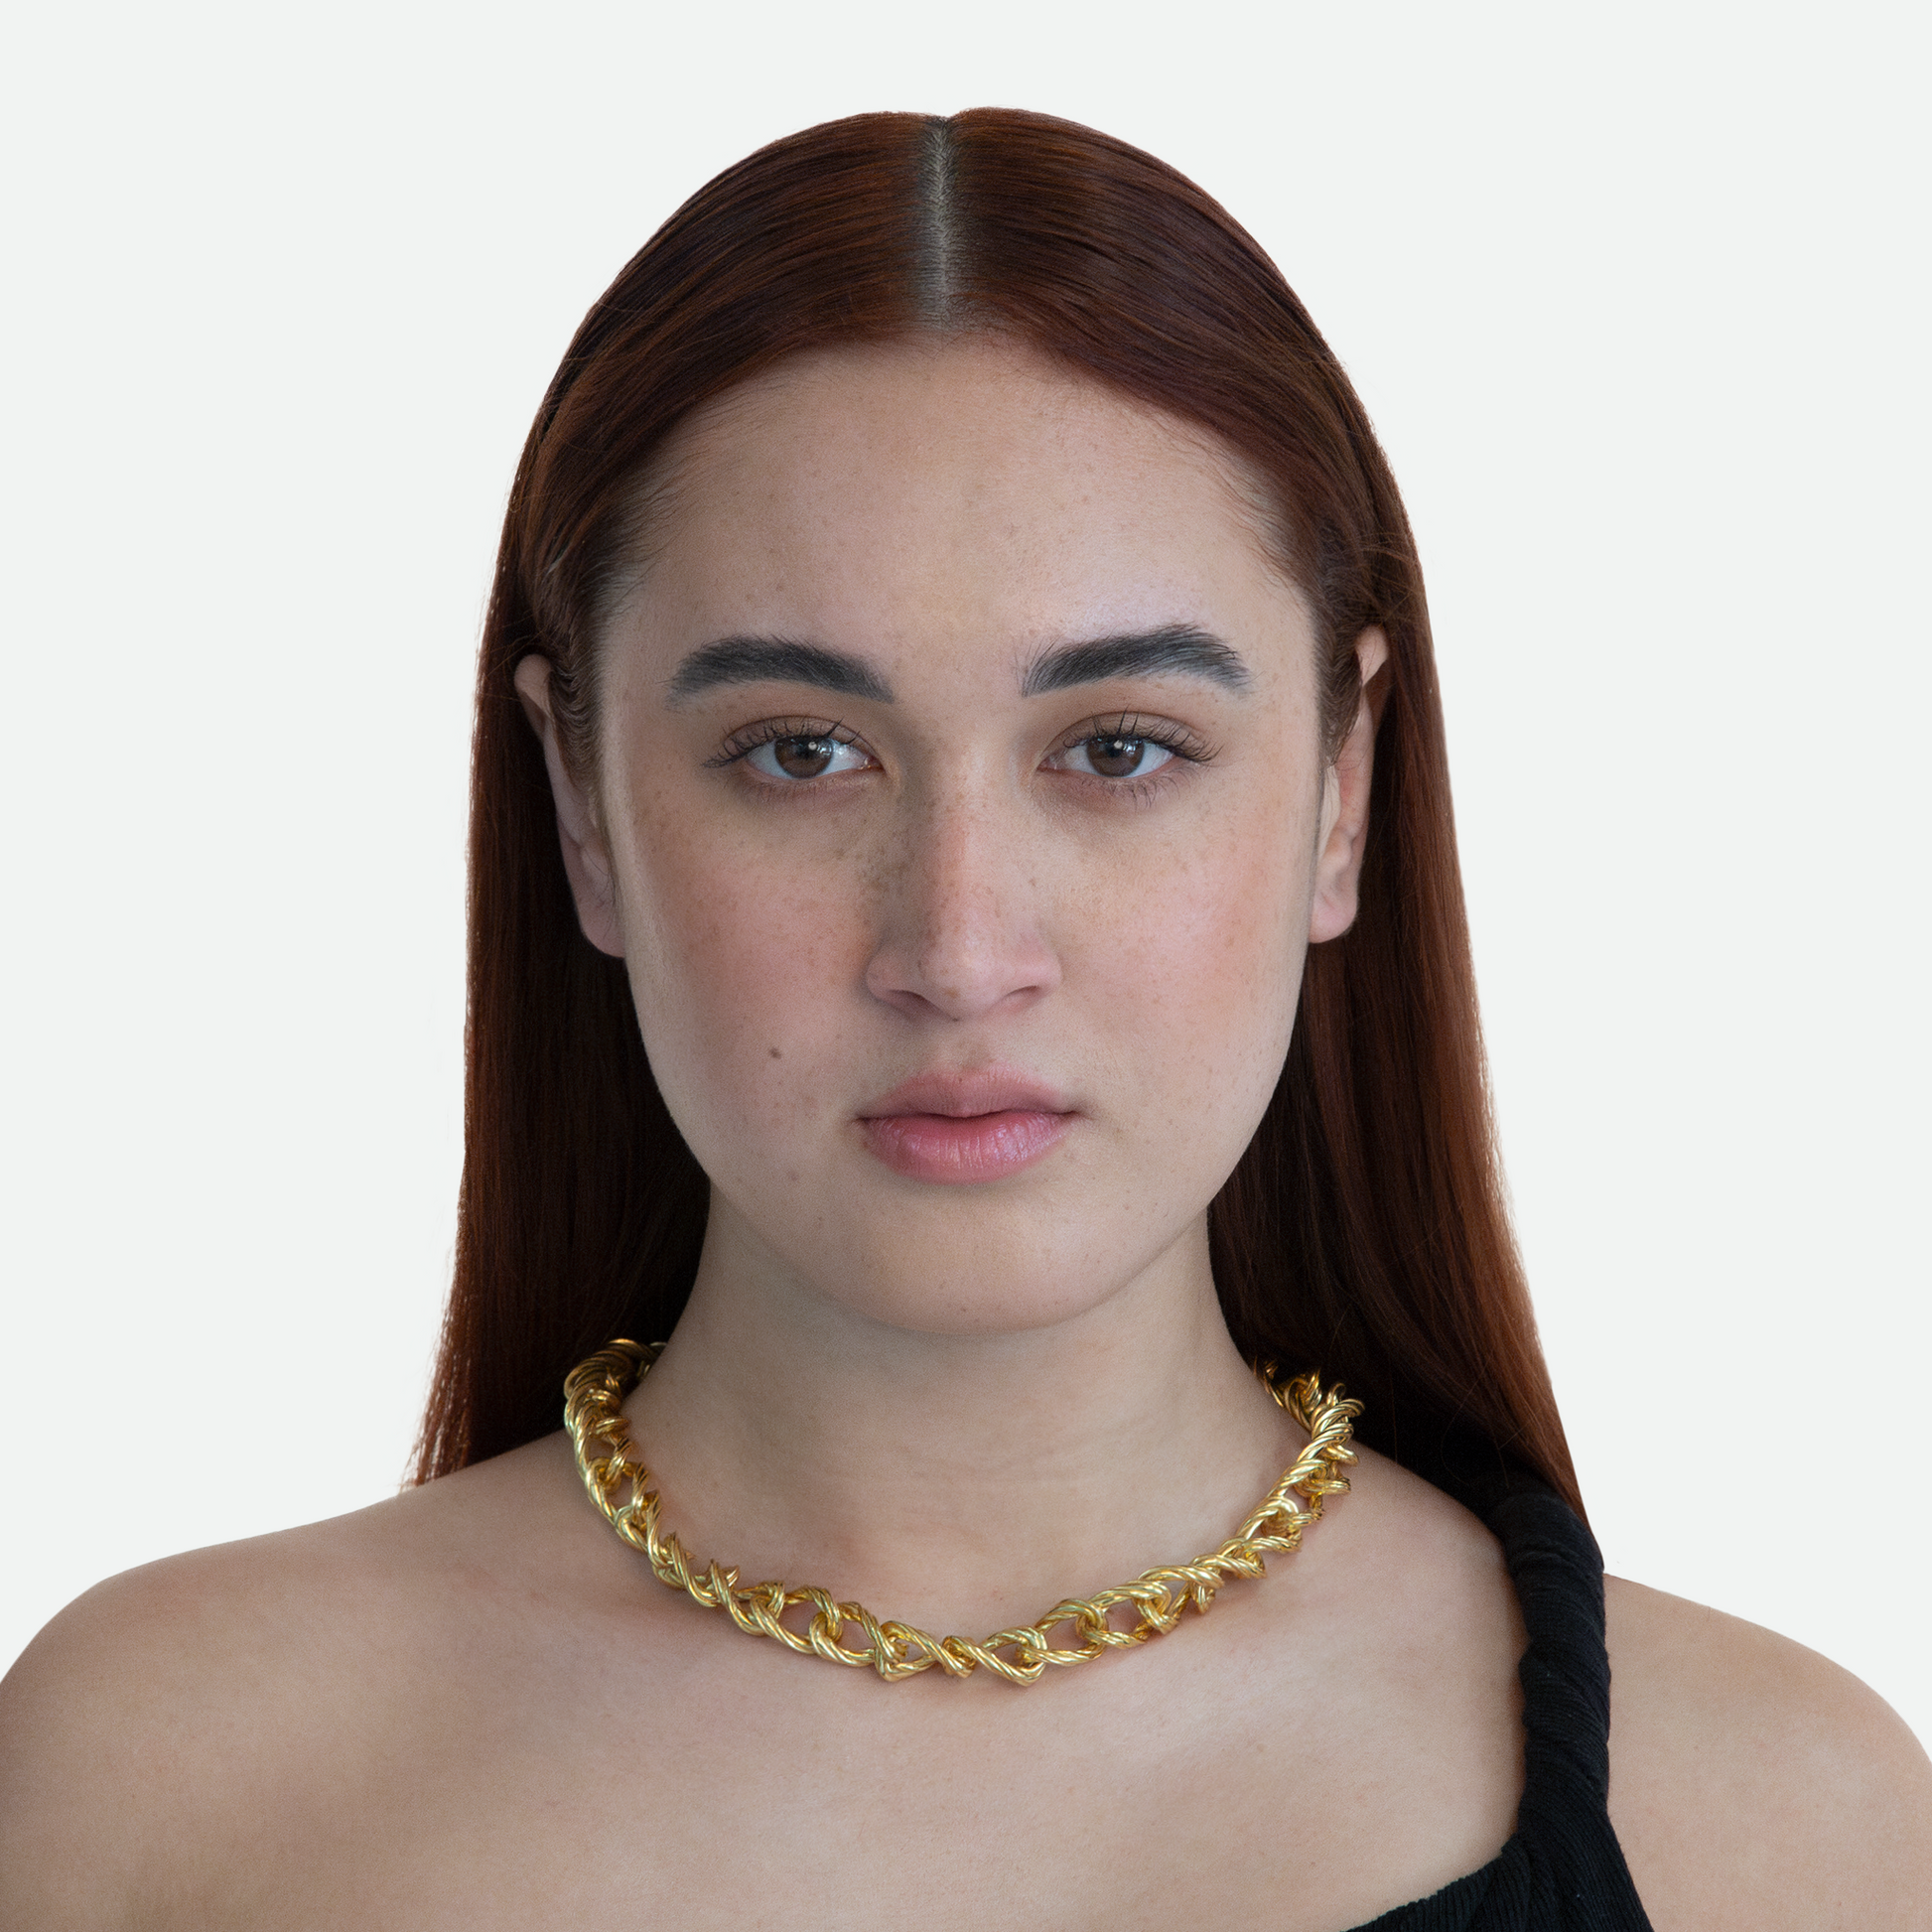 Model wearing the Helix necklace, showcasing the modern design of flowing links in a spiralling chain, on a white background.